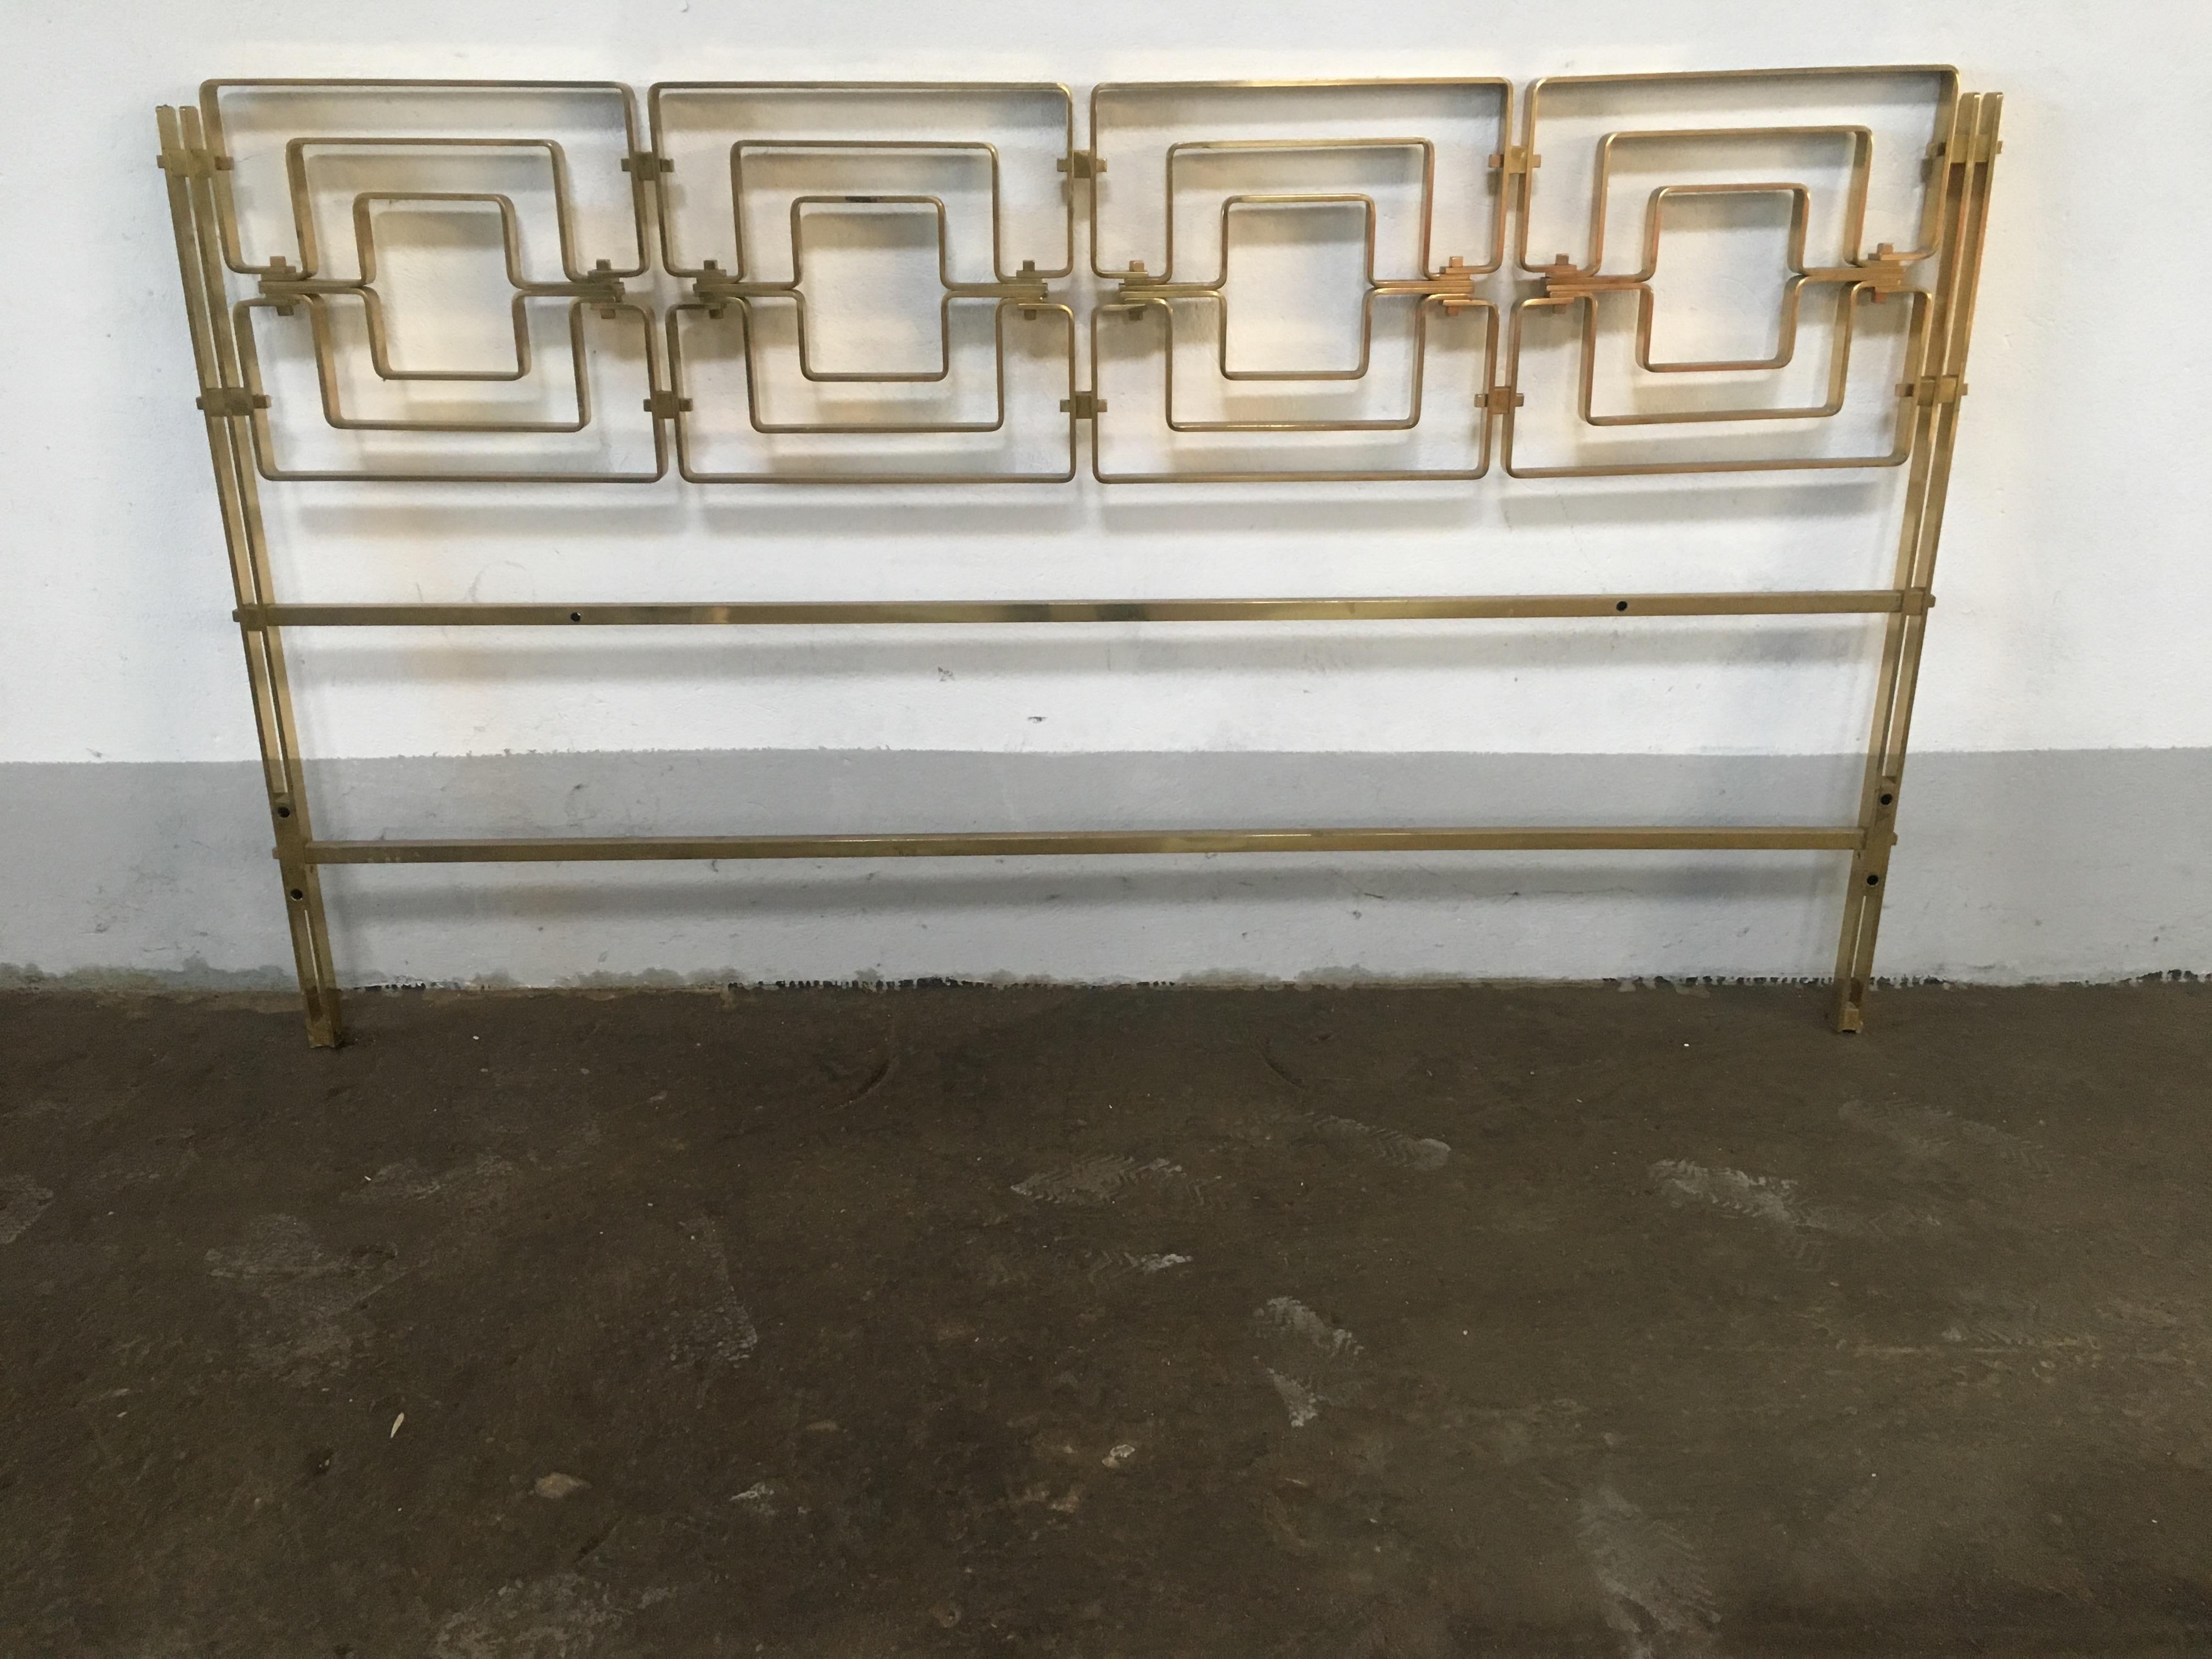 Mid-Century Modern Italian brass bed head with geometric patterns, 1970s.
The bed head presents some wear due to age and use as shown in the pictures.
There is the possibility to clean the brass (Quotation on demand).